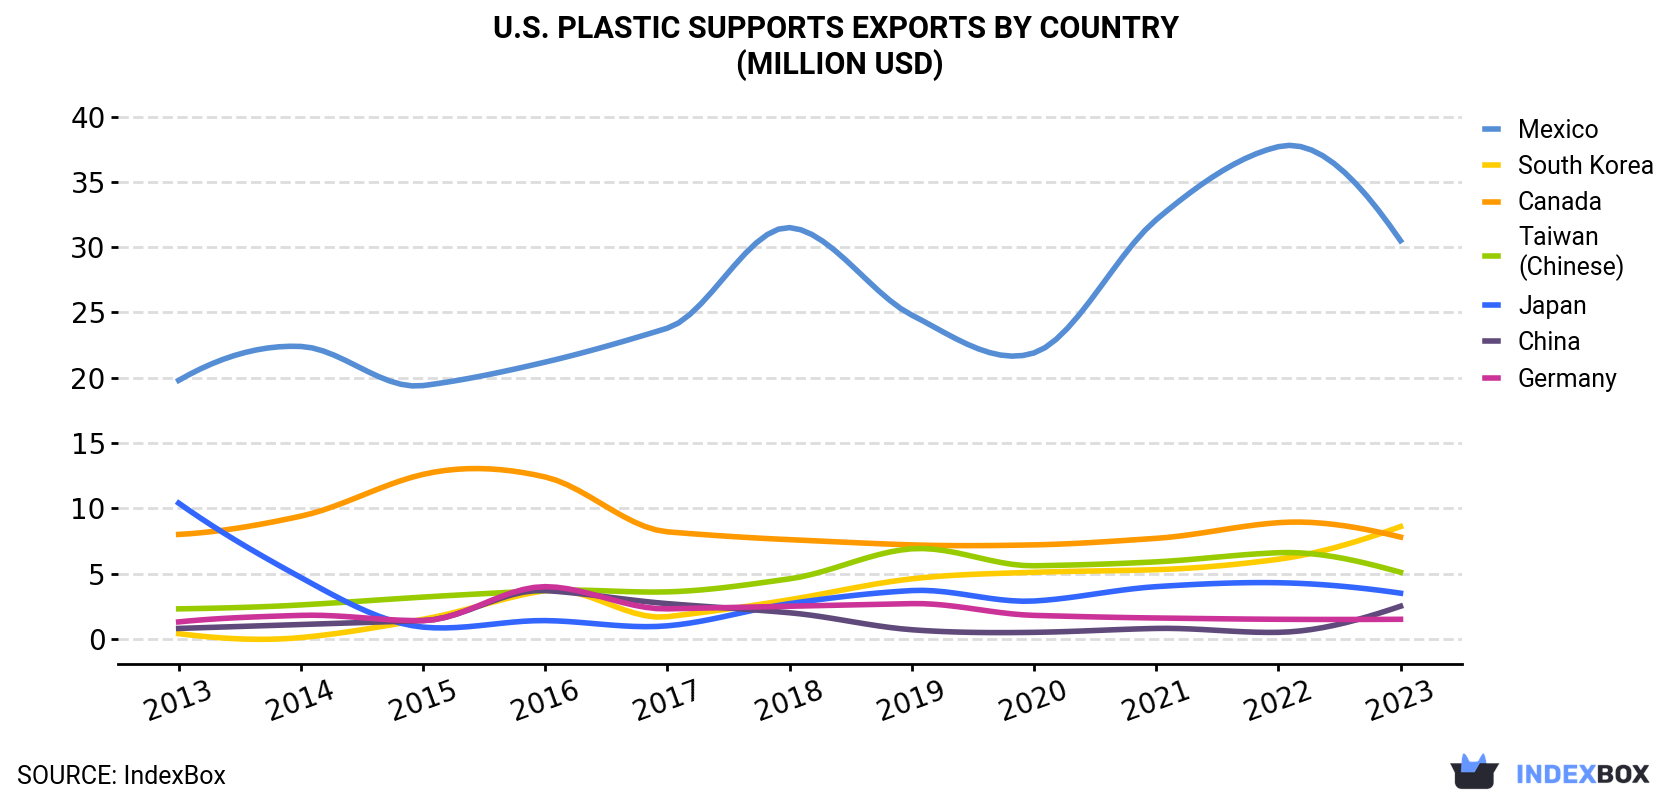 U.S. Plastic Supports Exports By Country (Million USD)